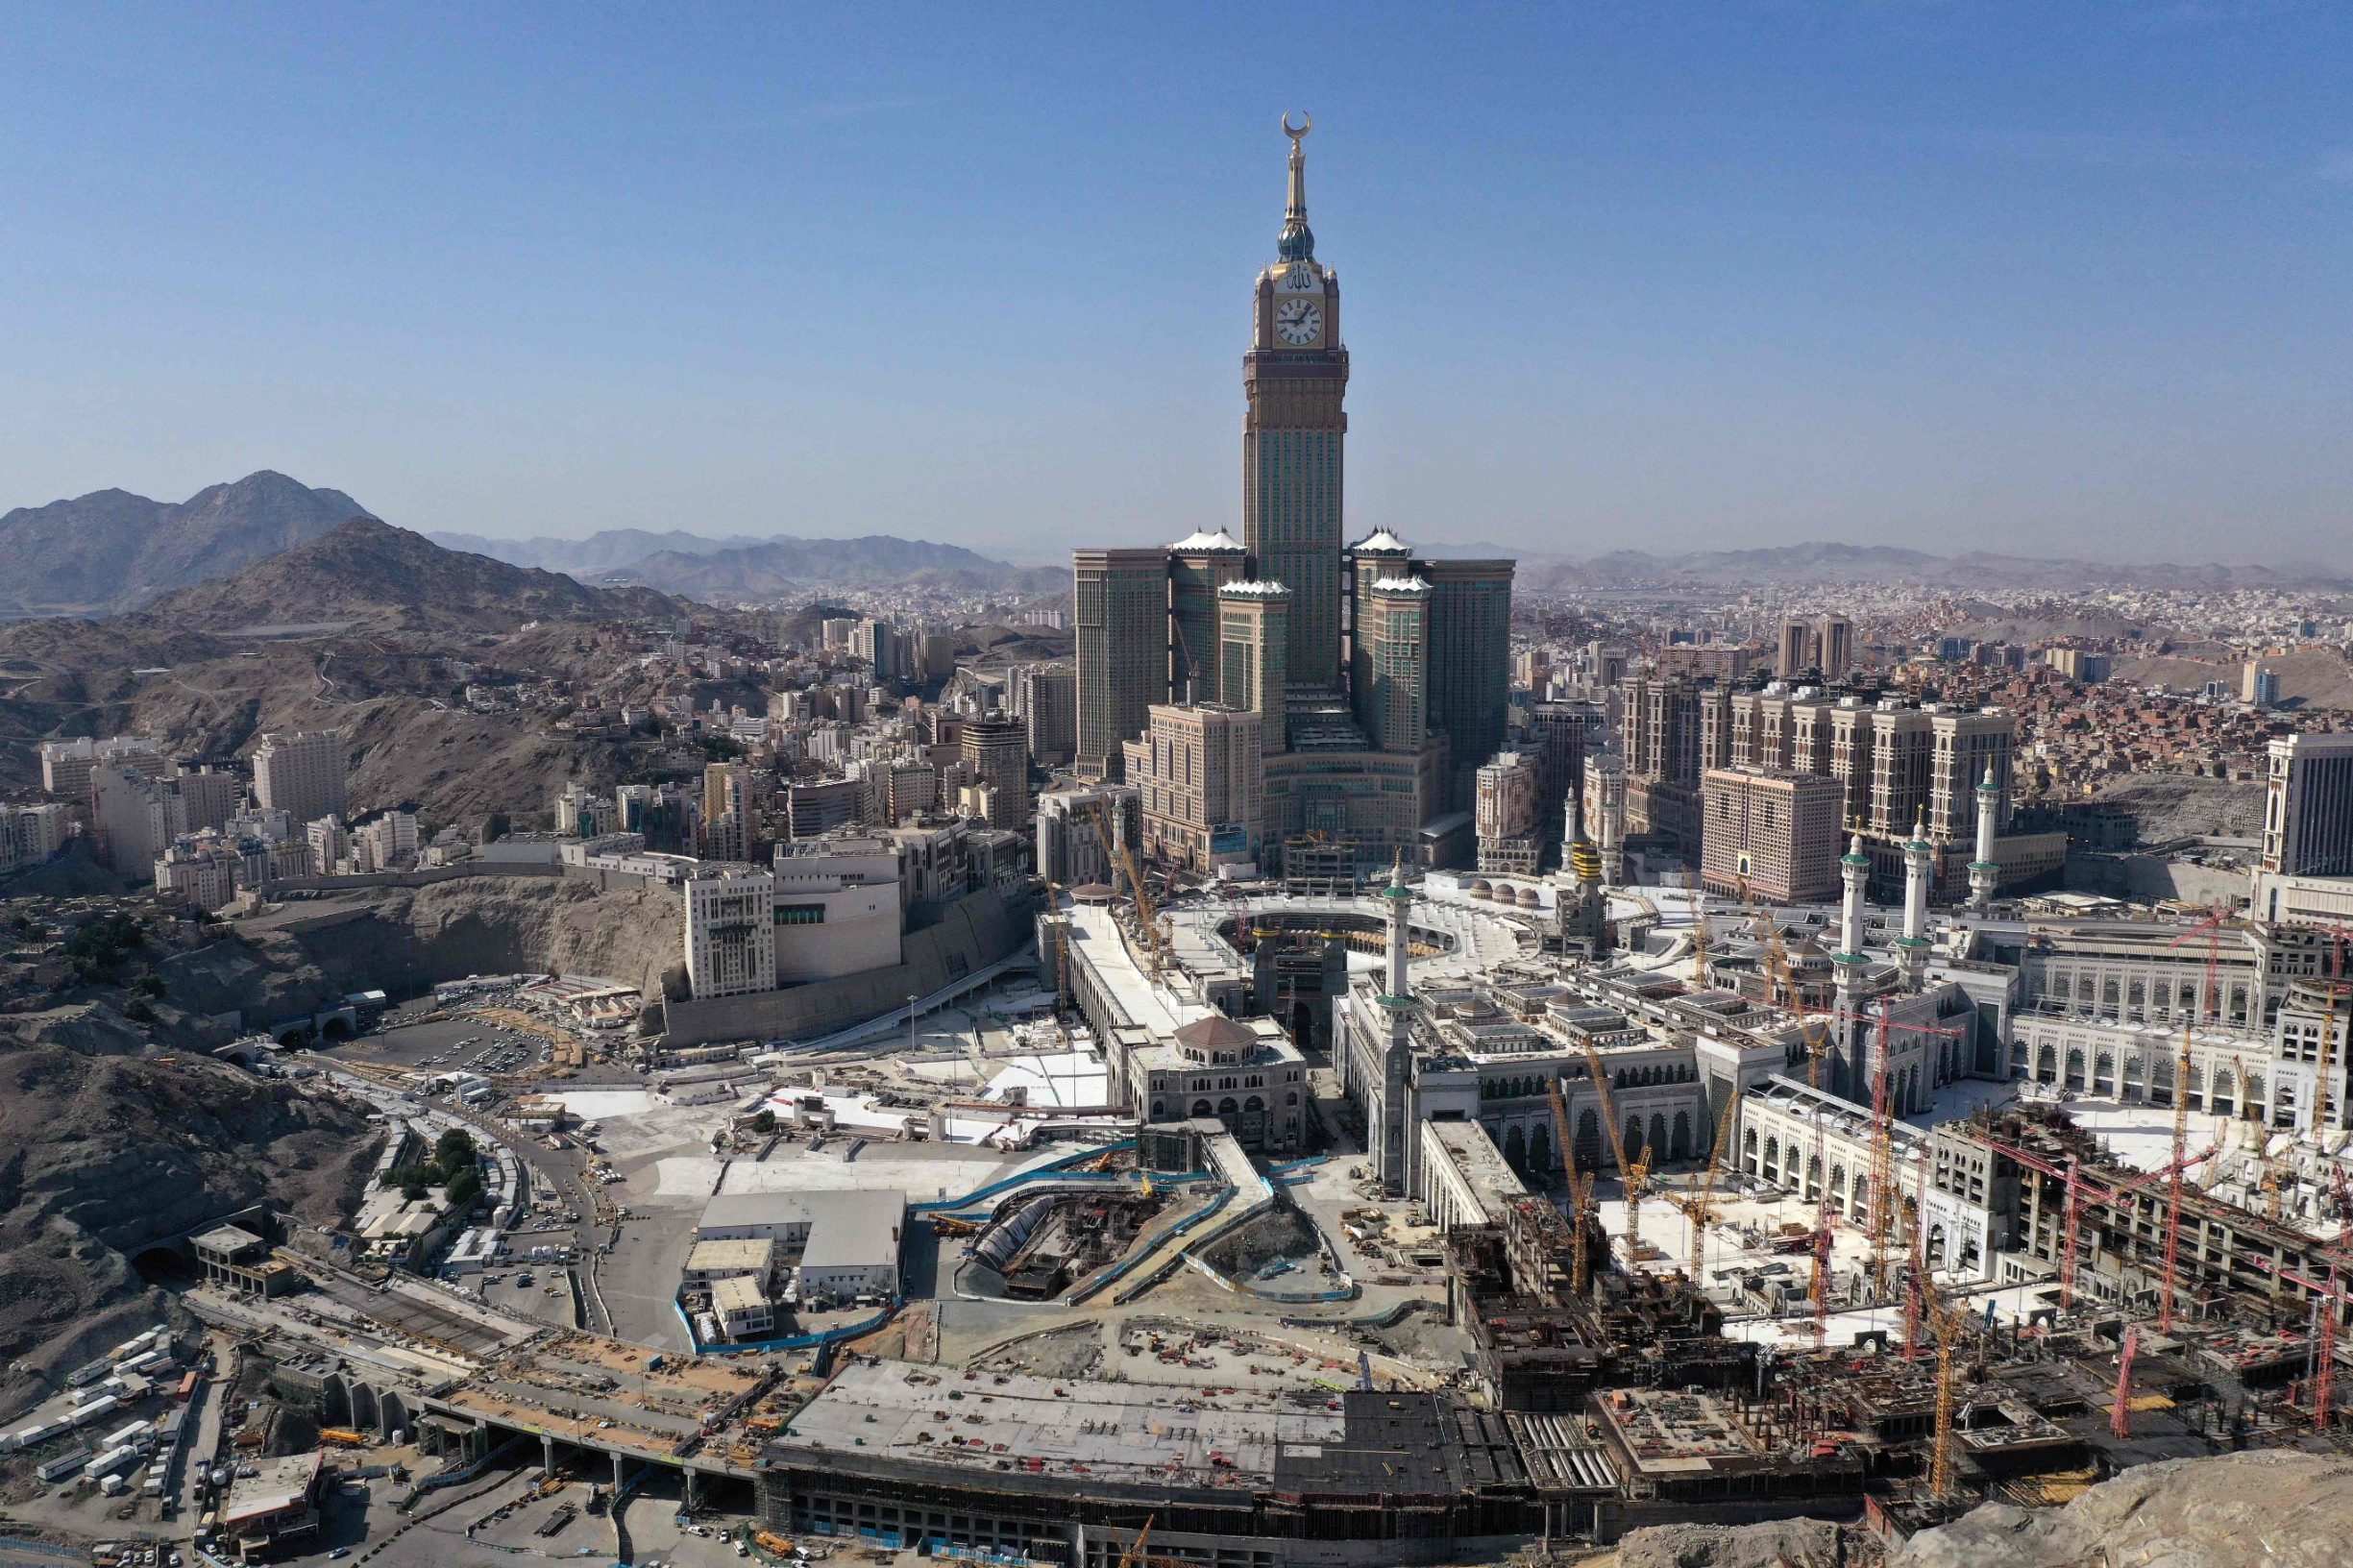 An aerial view shows the Great Mosque and the Mecca Tower and the deserted surroundings in the Saudi holy city of Mecca on April 8, 2020, during the novel coronavirus pandemic crisis. (Photo by BANDAR ALDANDANI / AFP)